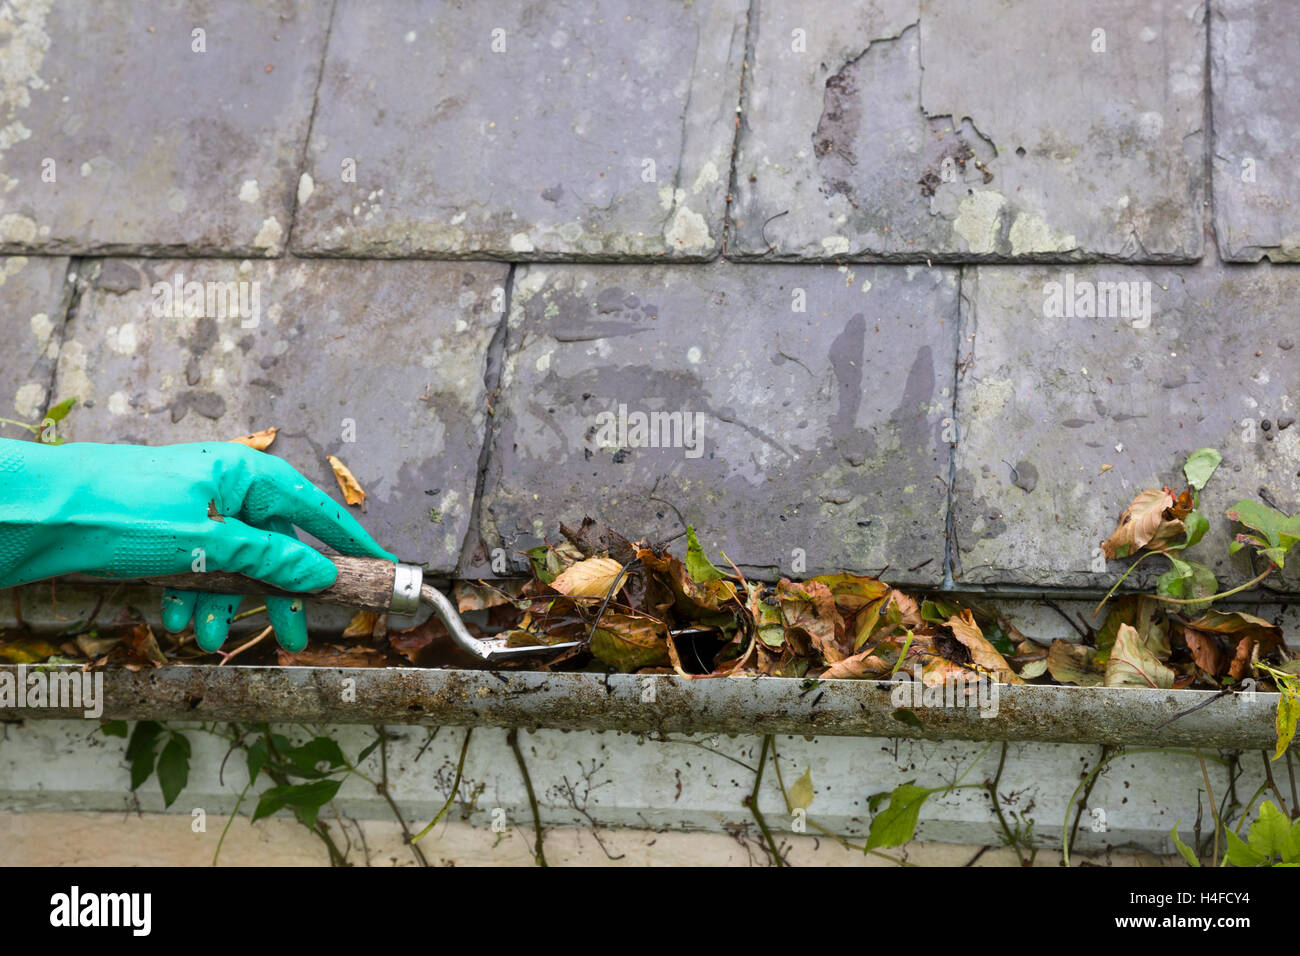 cleaning gutter blocked with autumn leaves Stock Photo